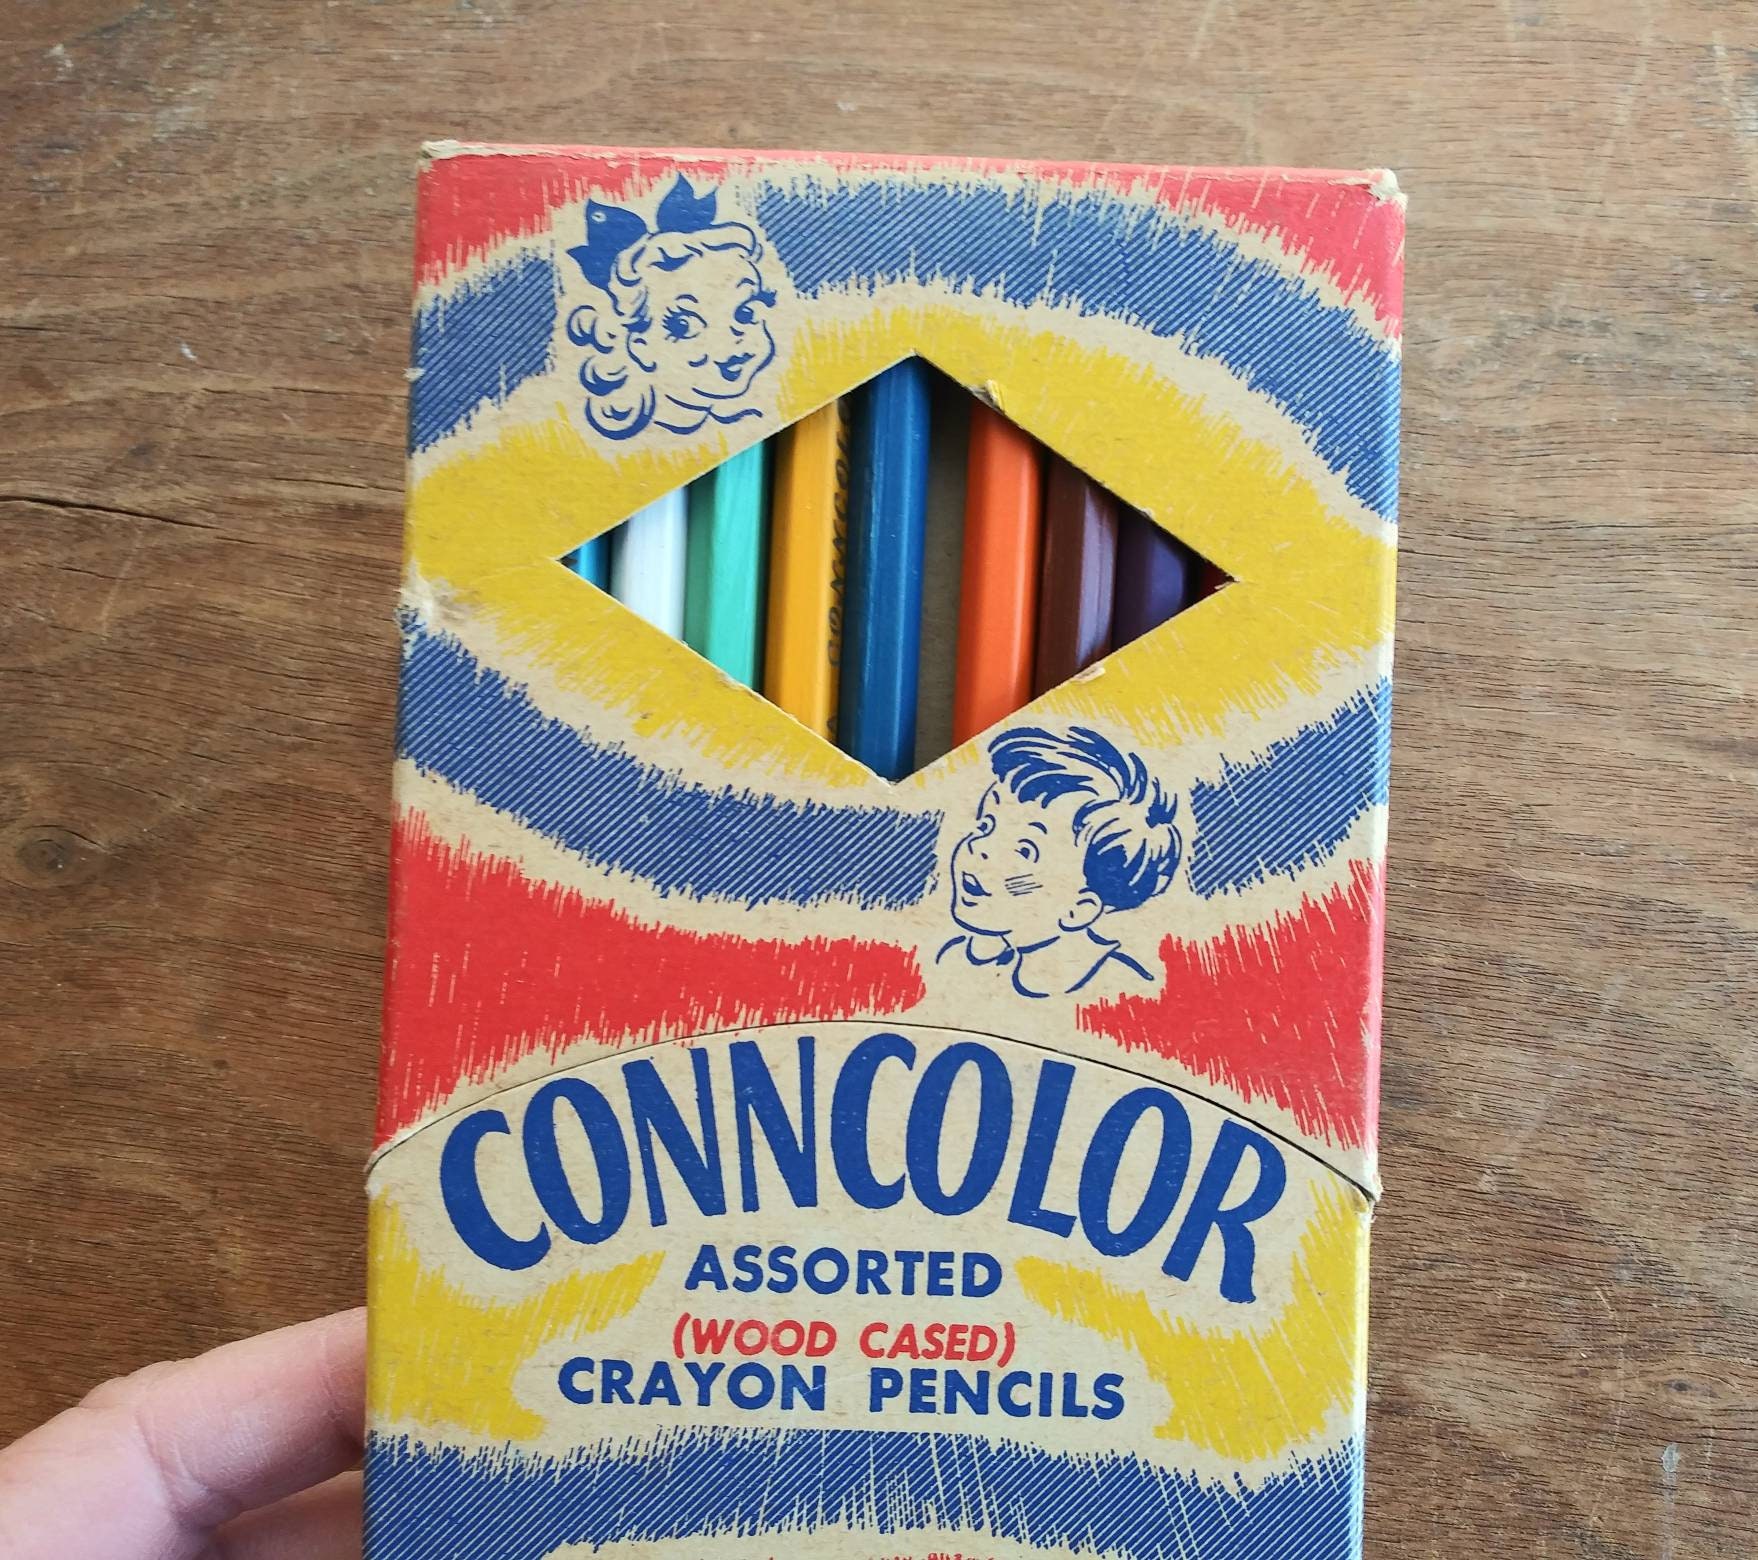 Vintage Jumbo Crayon Candles in 6 Assorted Scents, in Two 1950s